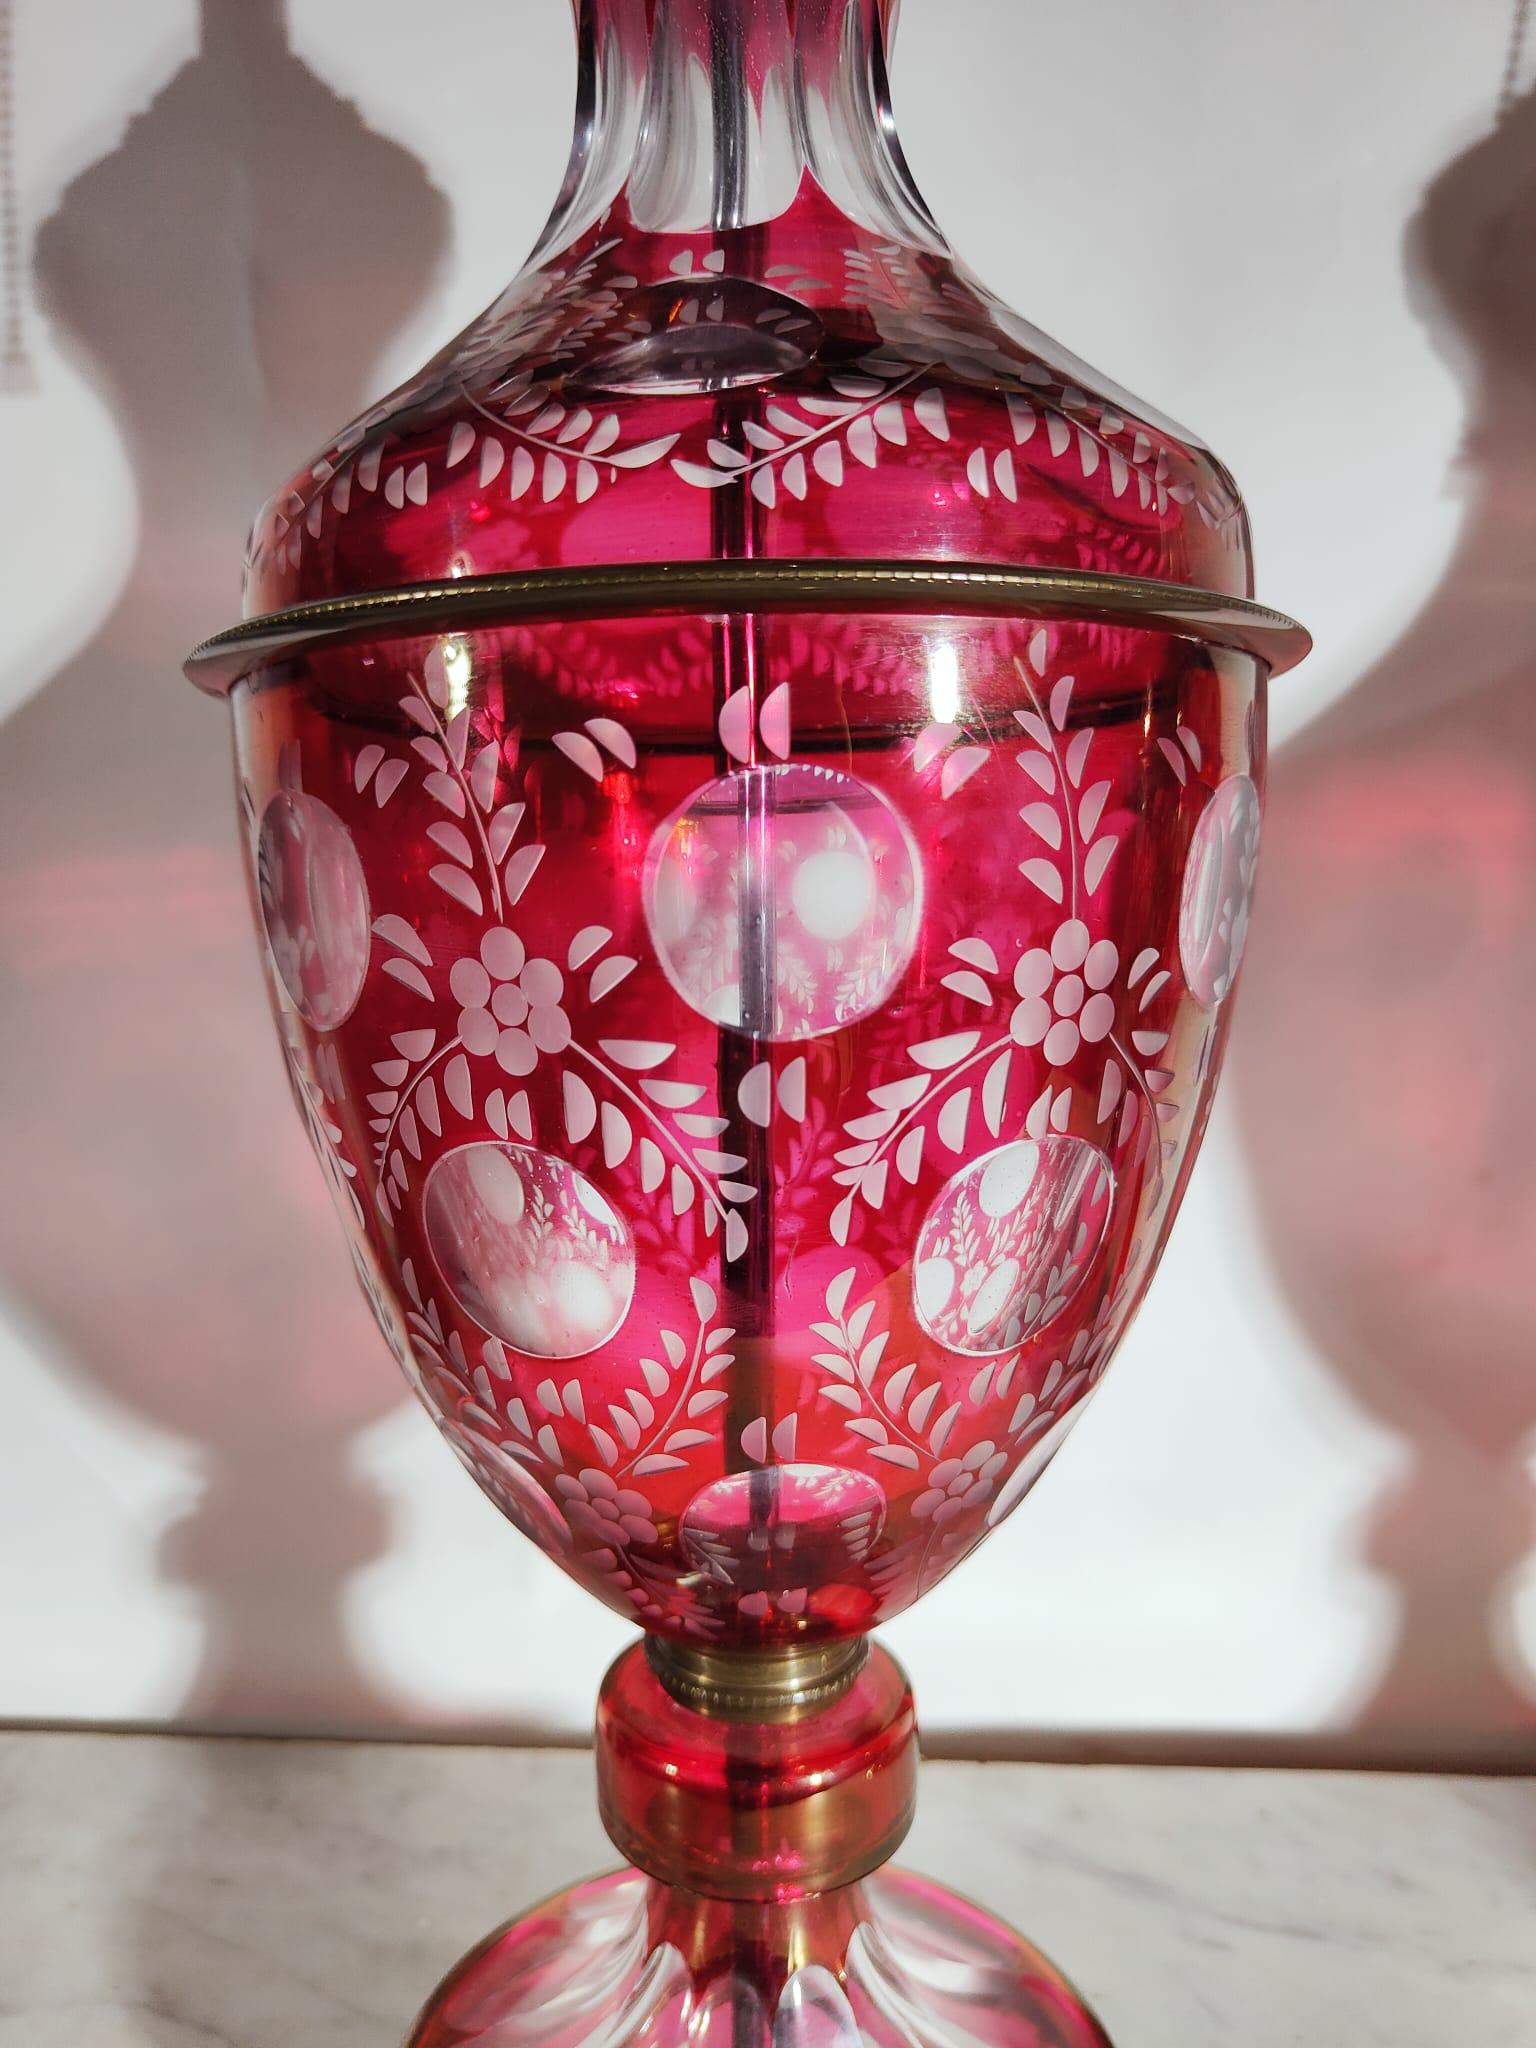 Lamps in cut glass from 1900.
Pair of red and transparent cut glass lamps in the shape of vases. 
They date from the first half of 1900. Made in France. 
They are in perfect condition without faults. 
Total measurement 82 cm and the glass vases